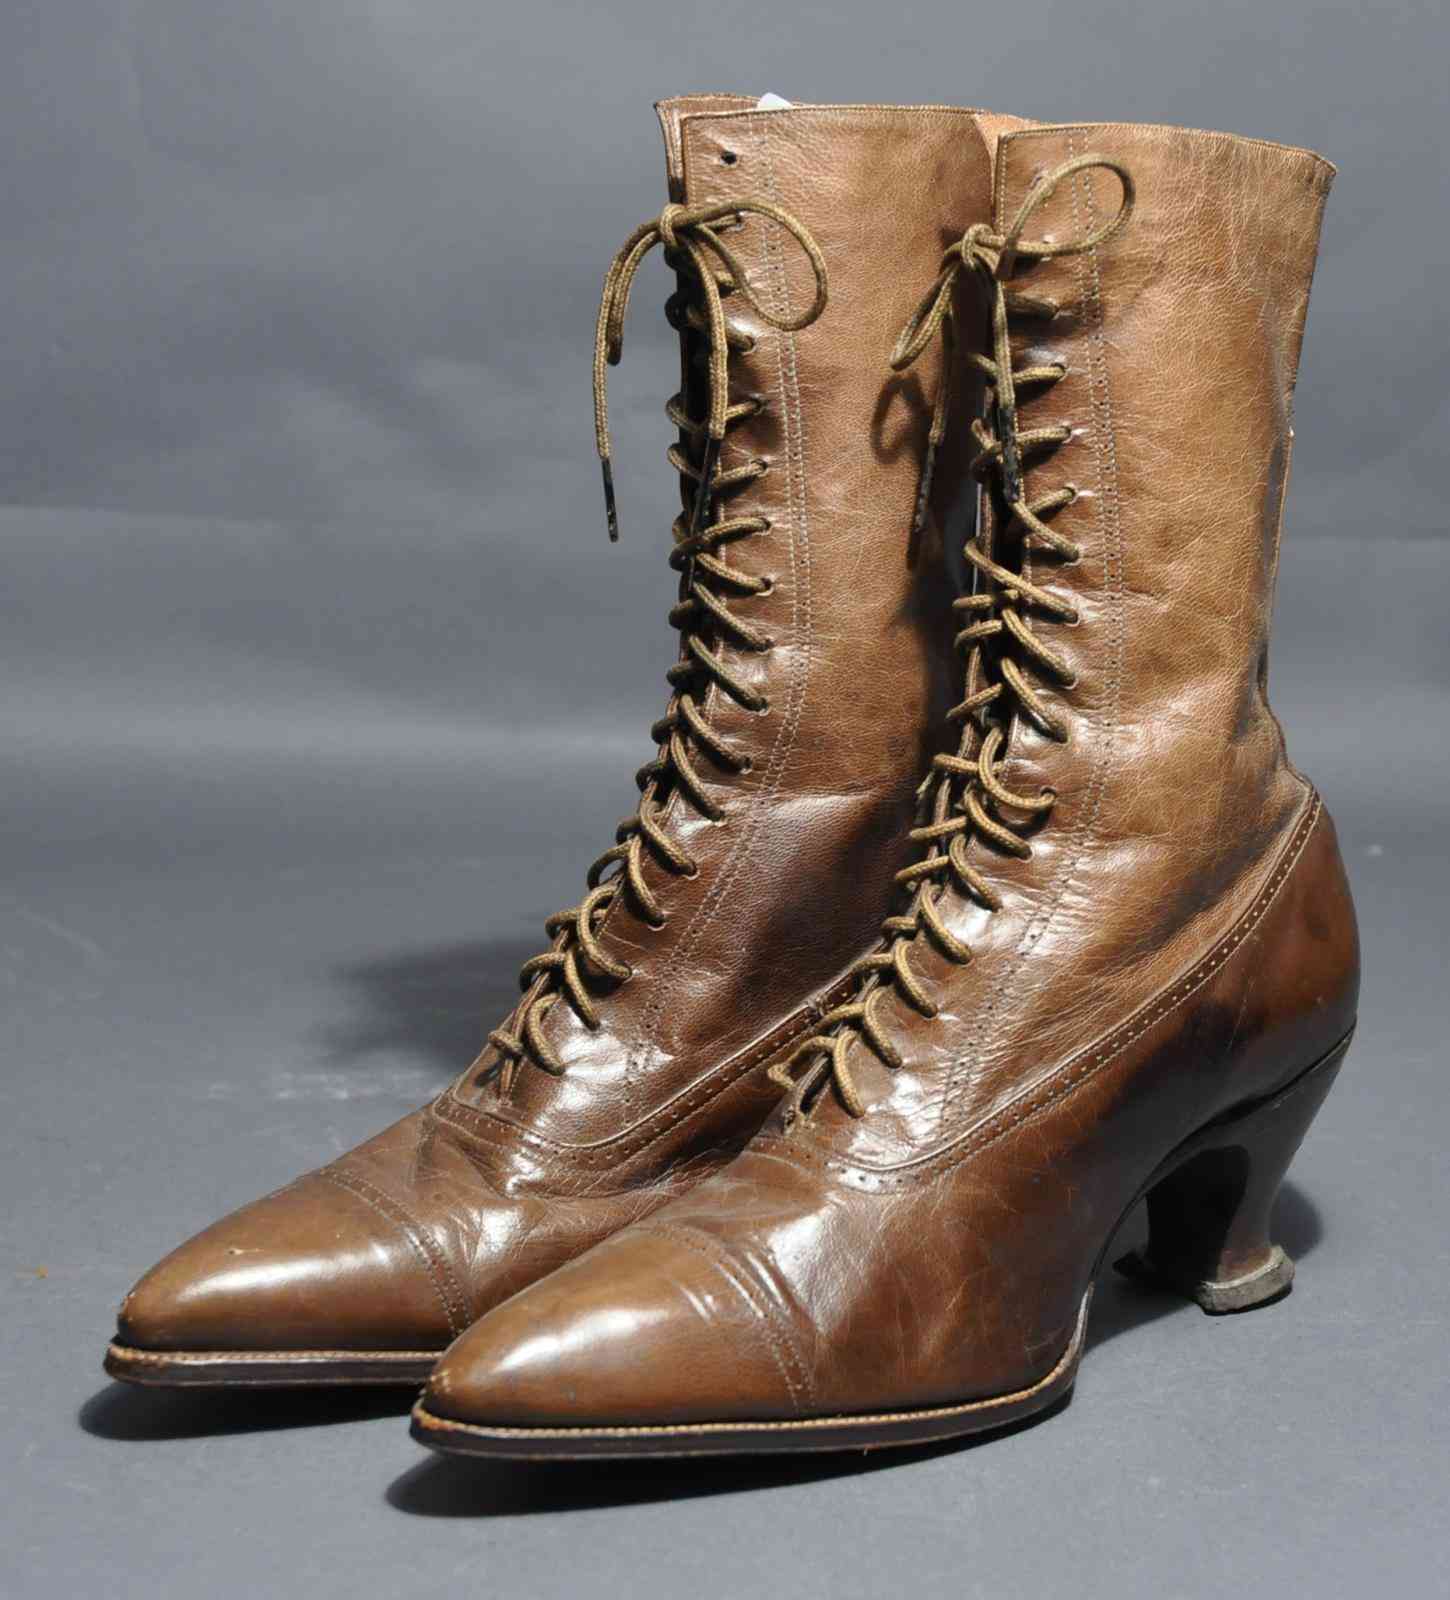 1959.027.001ab Woman’s Leather Lace-up Boots, c. 1915